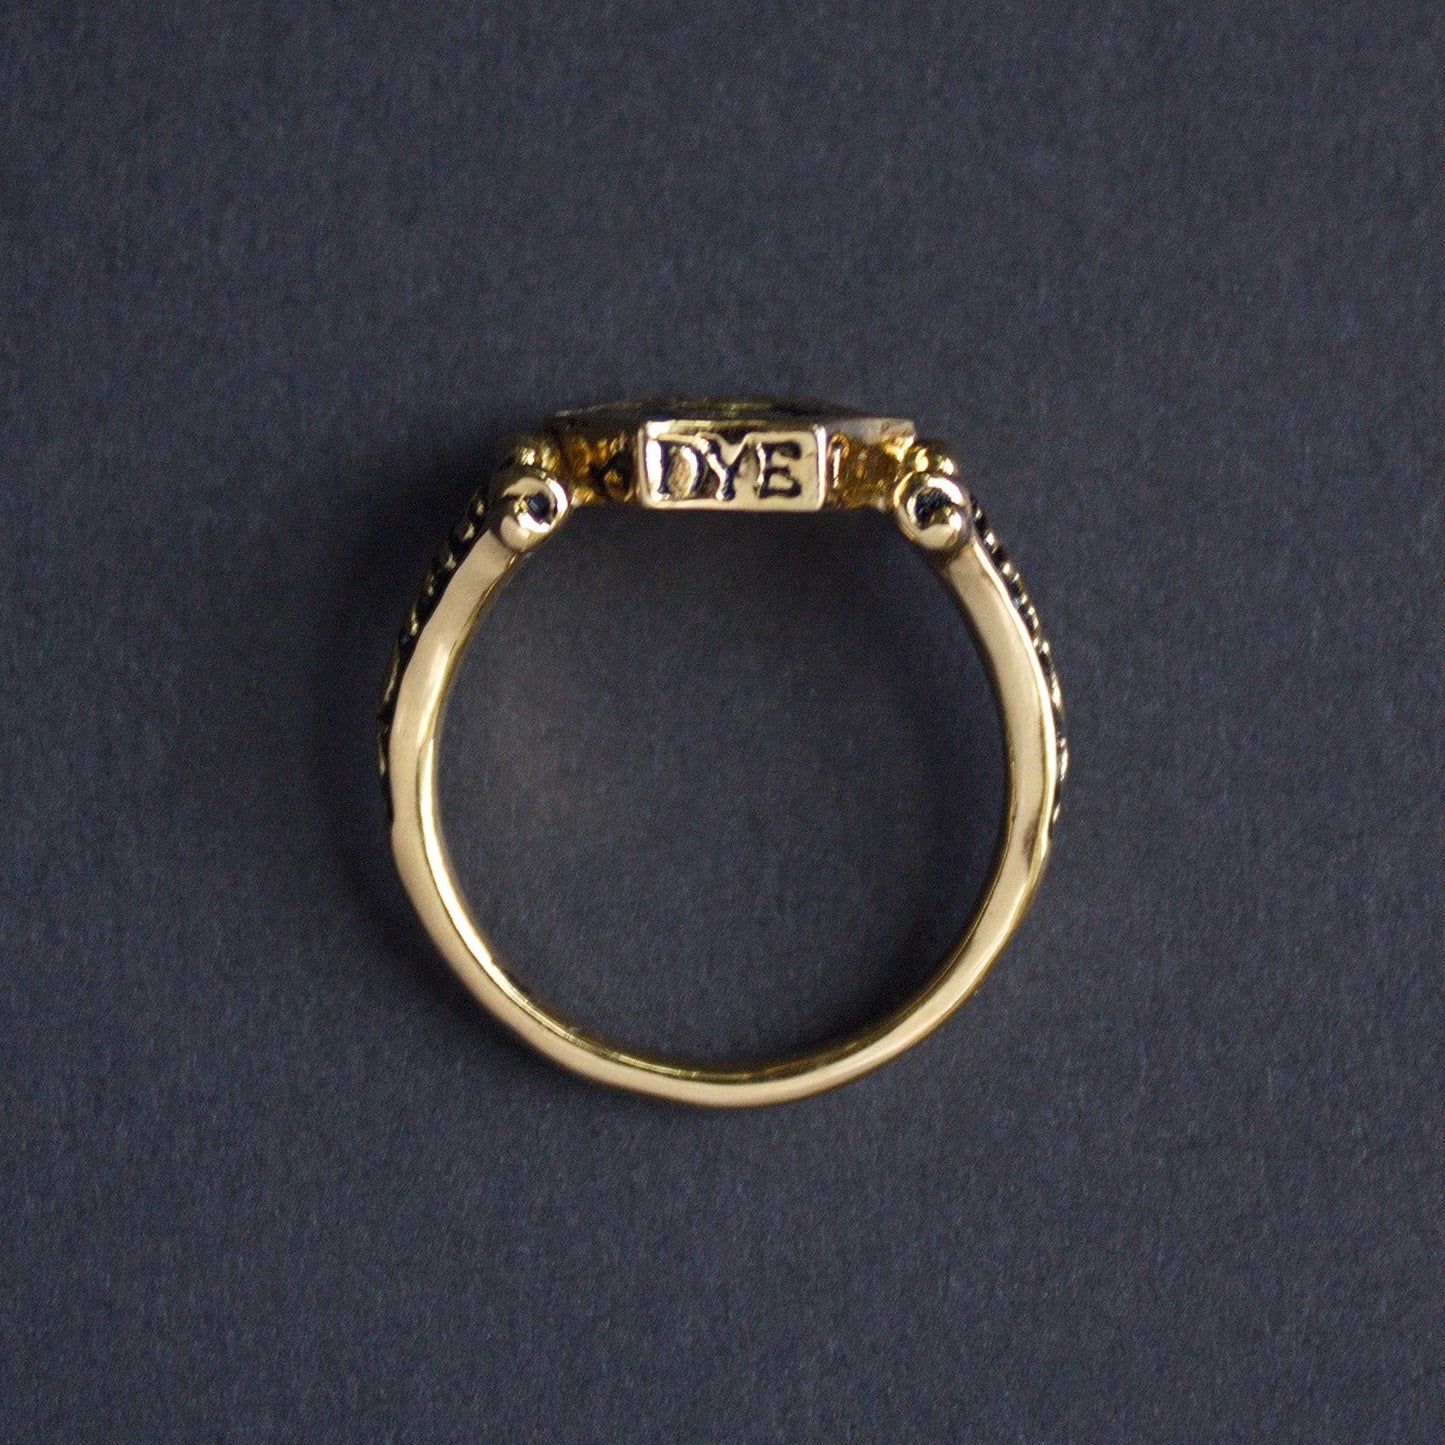 Mourning Ring with Skull from England, 1550-1600 A.D.